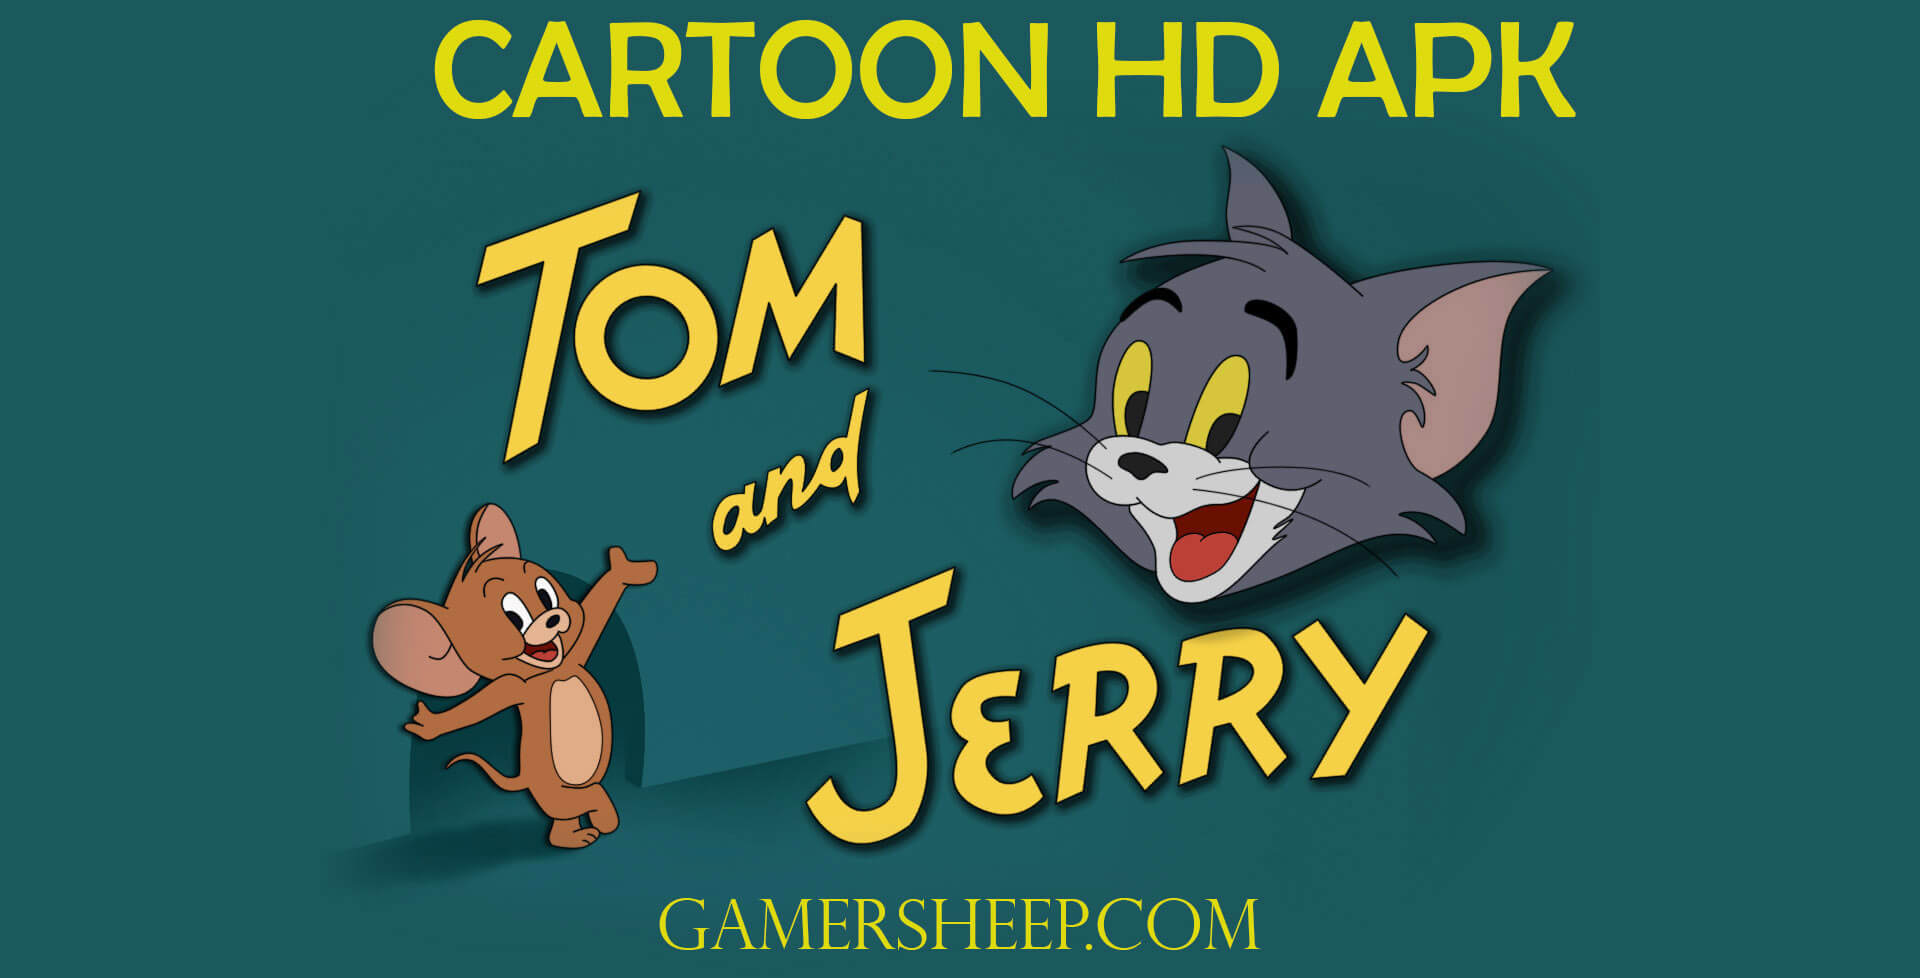 cartoon hd apk download for android